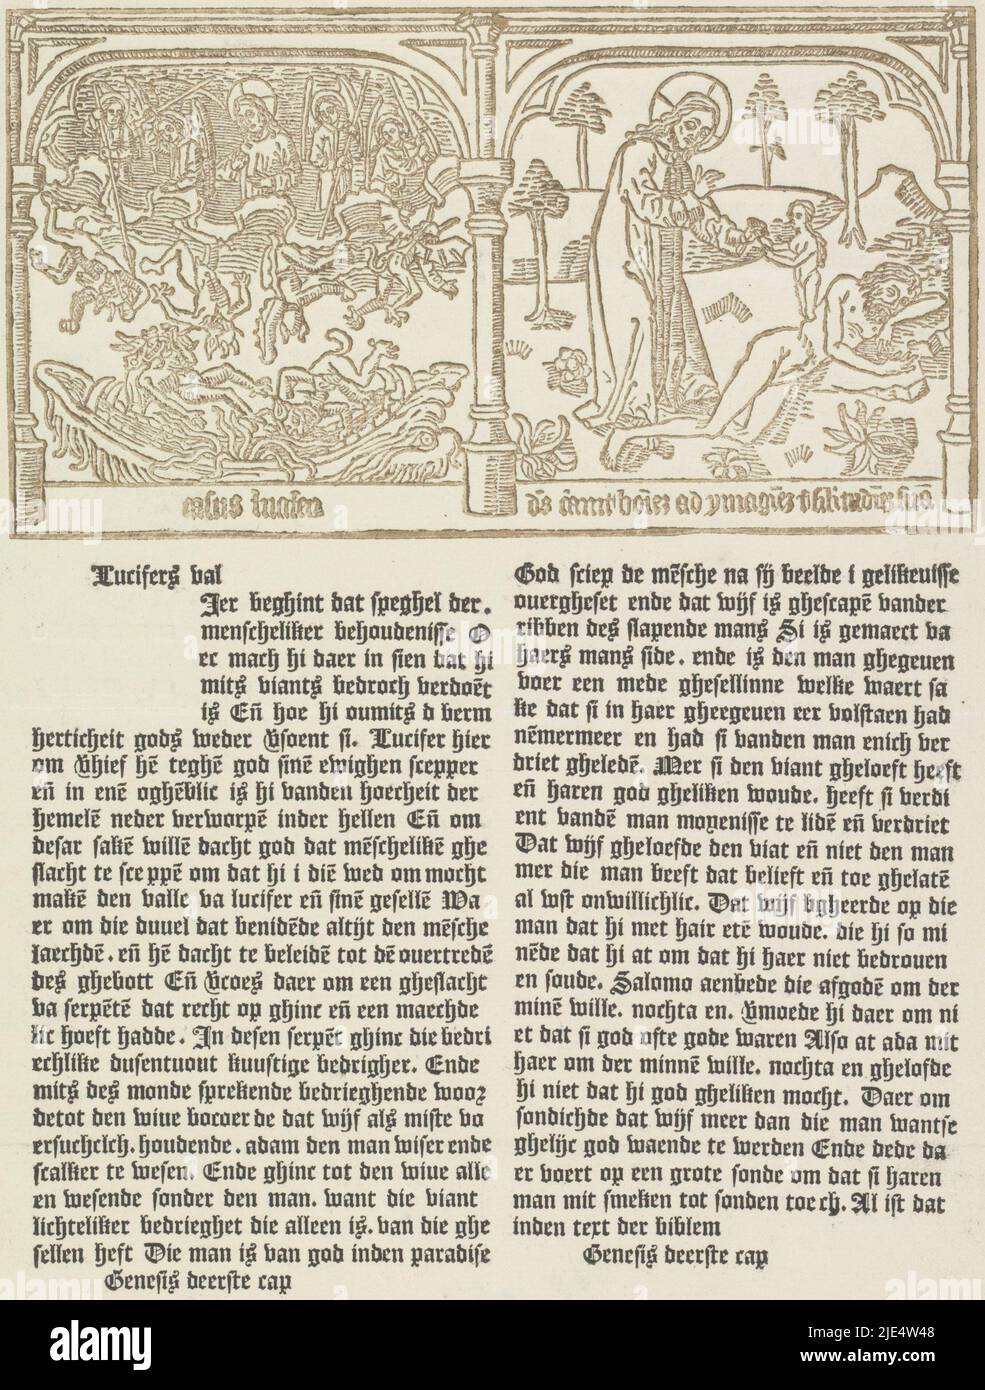 On the left the fall of Lucifer (Satan) and on the right the creation of Eve from a rib of Adam. In a frame two lines of Latin text. Underneath two columns of Dutch text, Fall of Lucifer (Satan) and the creation of Eve., print maker: Cornelis van Noorde, (mentioned on object), printer: Johannes Enschedé (I), (mentioned on object), Haarlem, 1762, paper, letterpress printing, h 332 mm × w 229 mm Stock Photo